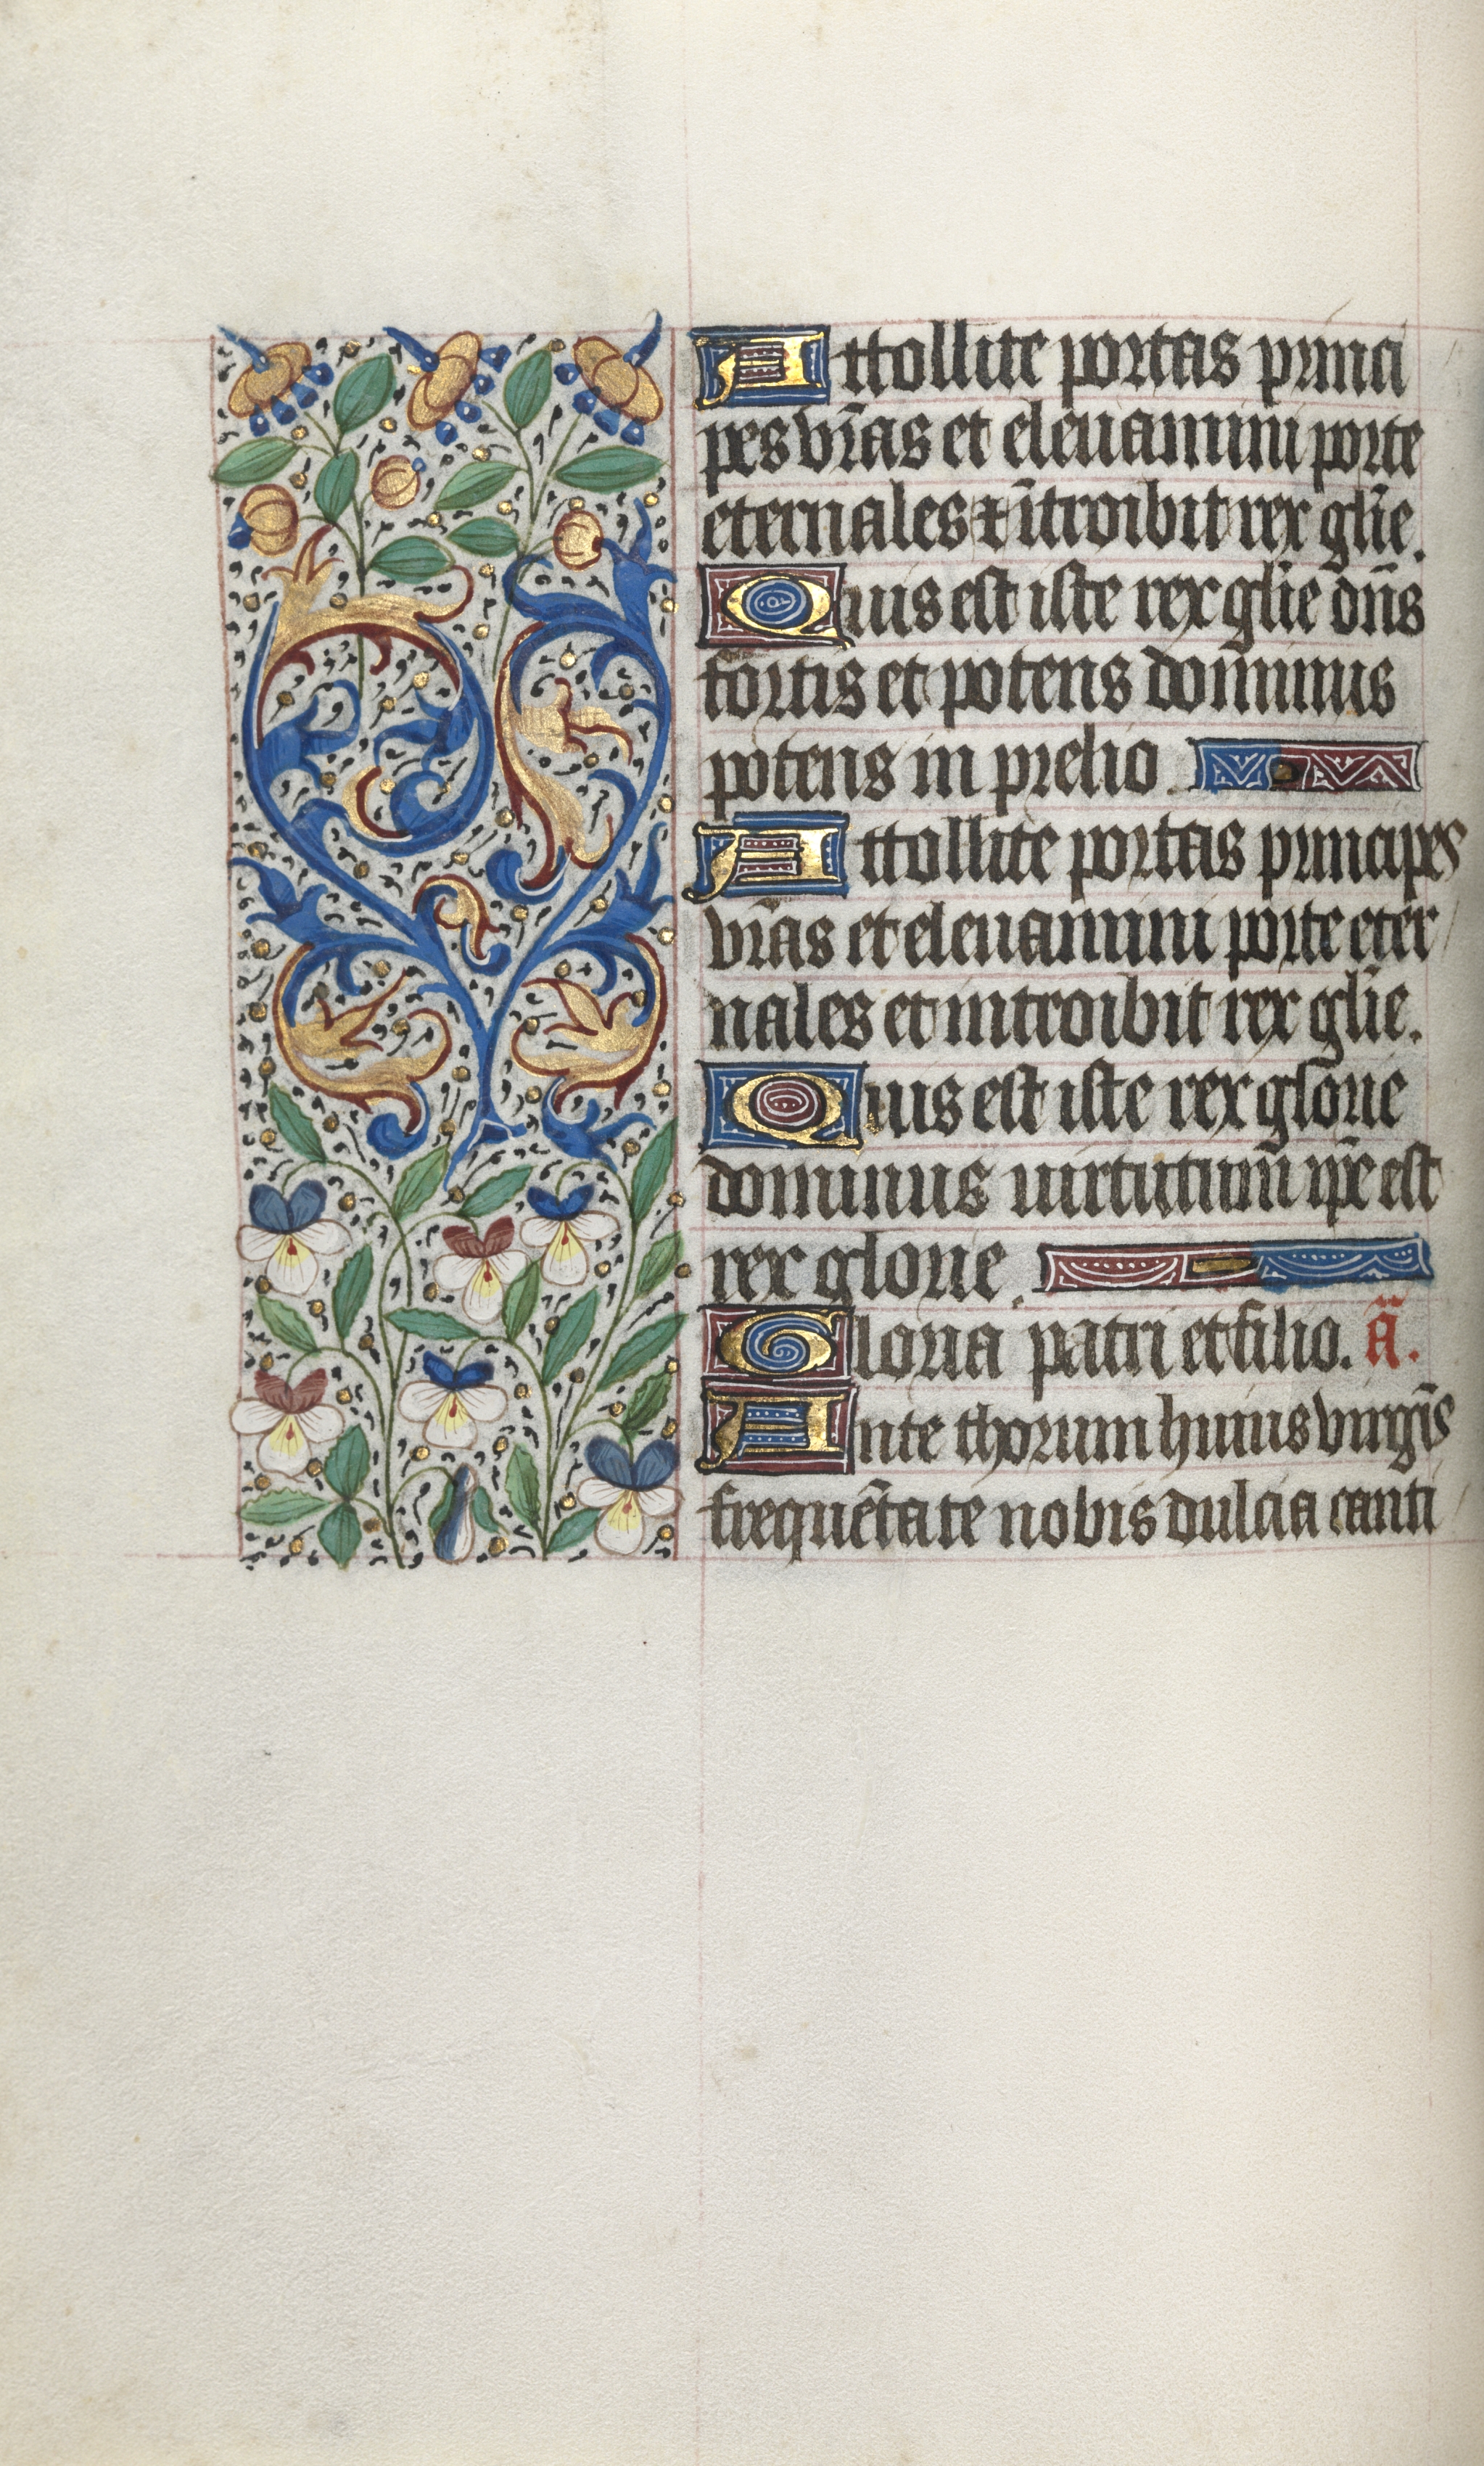 Book of Hours (Use of Rouen): fol. 34v